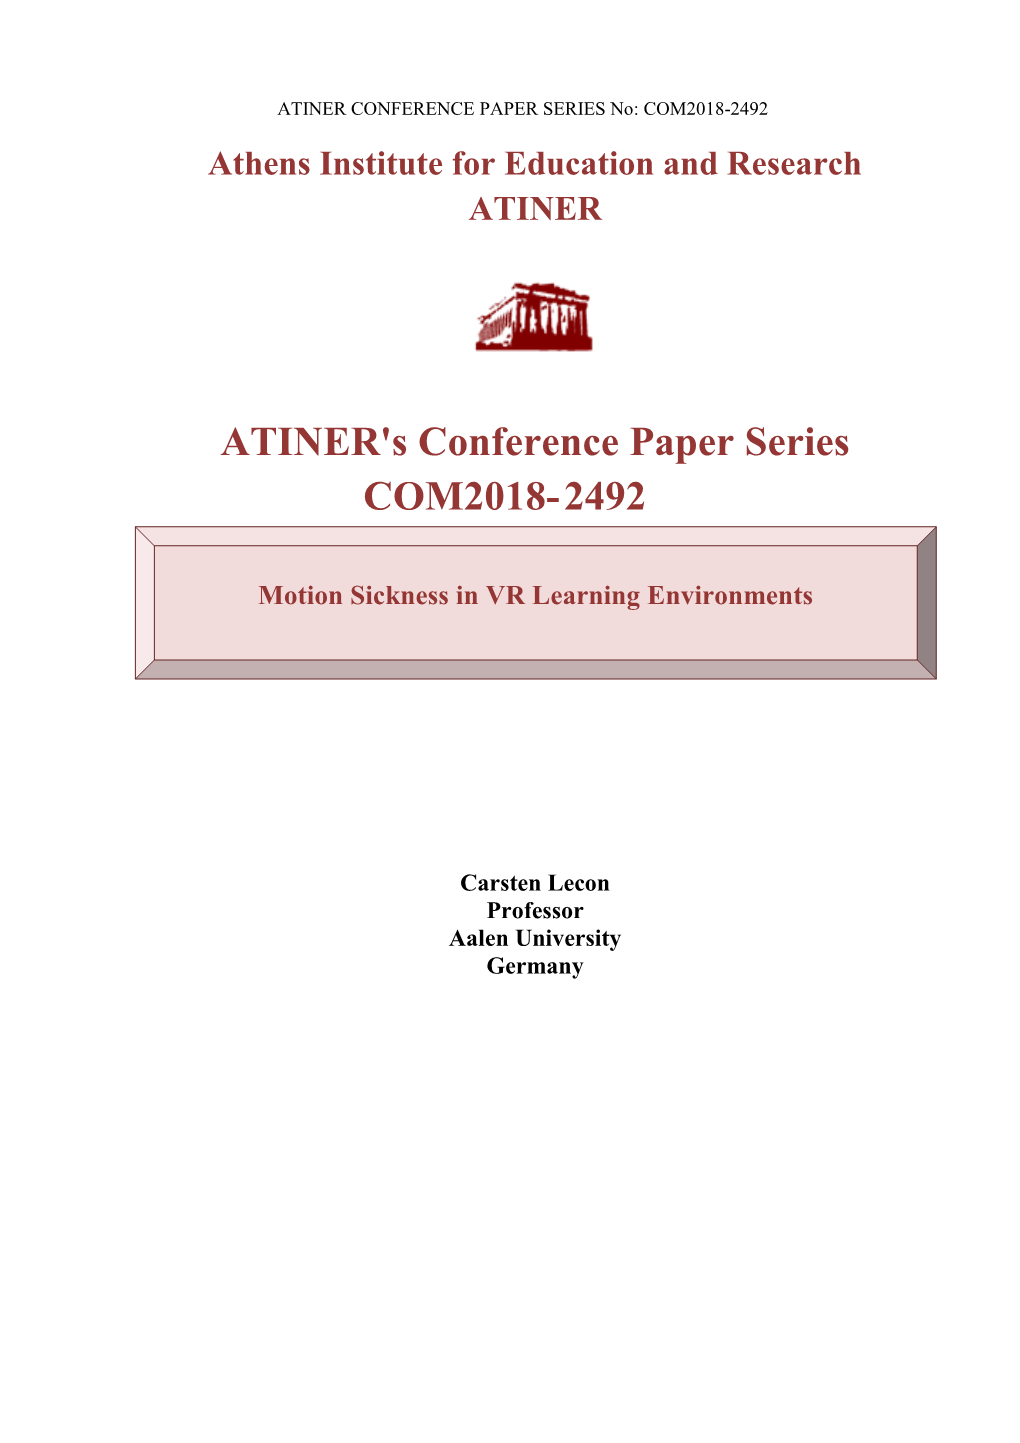 ATINER's Conference Paper Series COM2018-2492